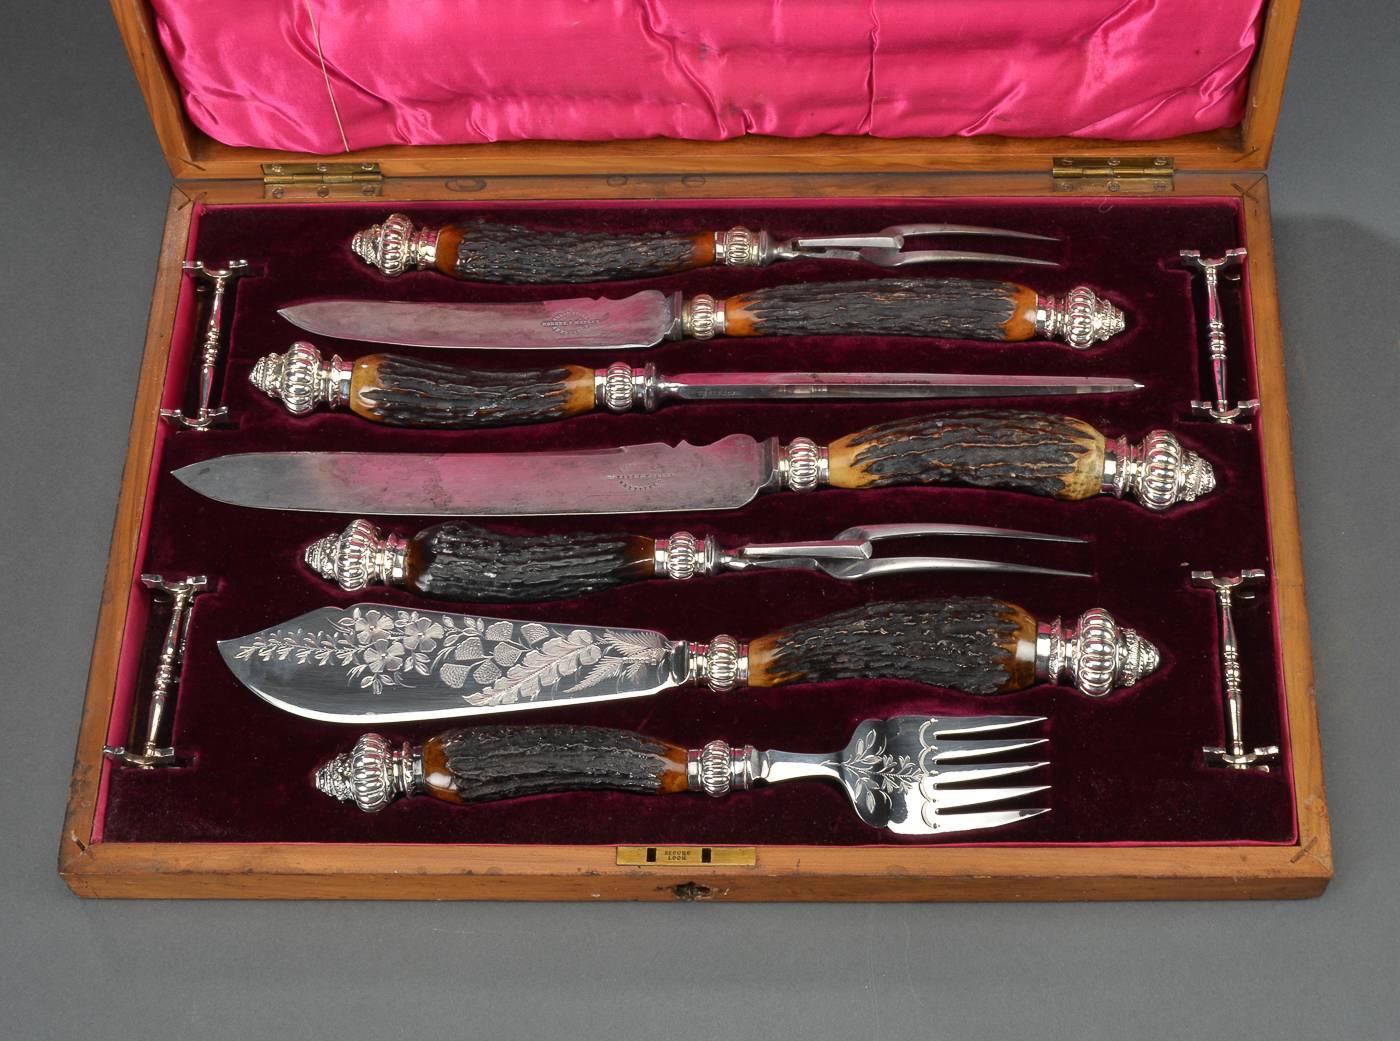 Victorian metal, Sheffield and horn 11 pieces carving set
In mahogany box.